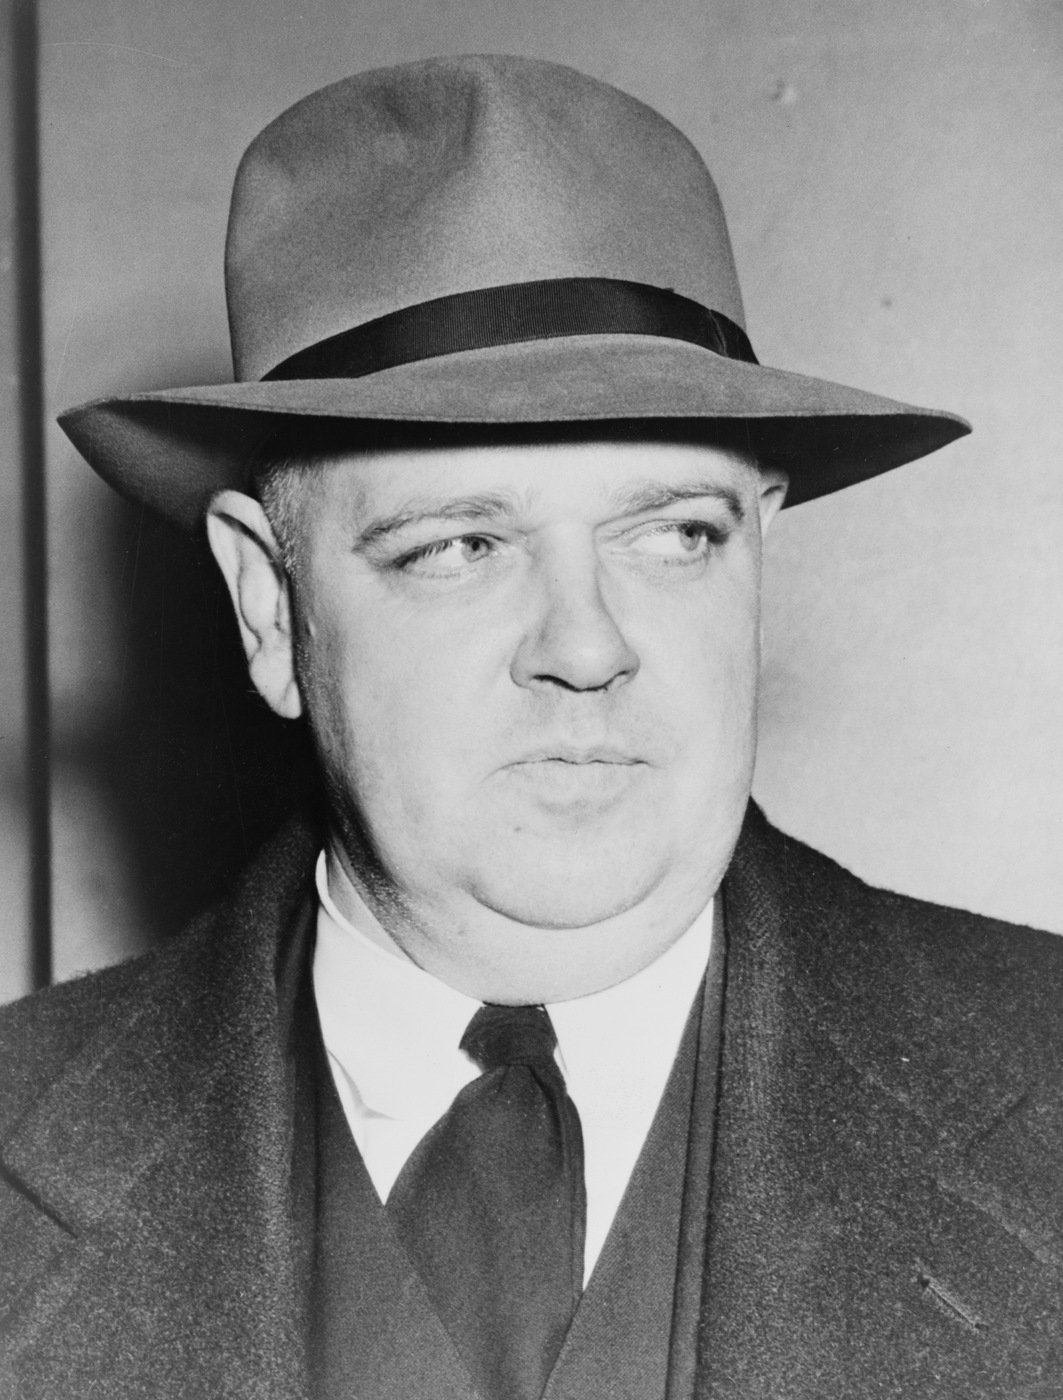 Whittaker Chambers was a Soviet spy in the U.S. during the 1930s. He renounced the Communist Party in approximately 1938 and eventually became a senior editor at Time Magazine. In 1948, Chambers provided documents to Congress that proved that his former colleague Alger Hiss was also a Soviet spy, leading to the conviction of Hiss in 1950. Library of Congress photograph, circa 1948.